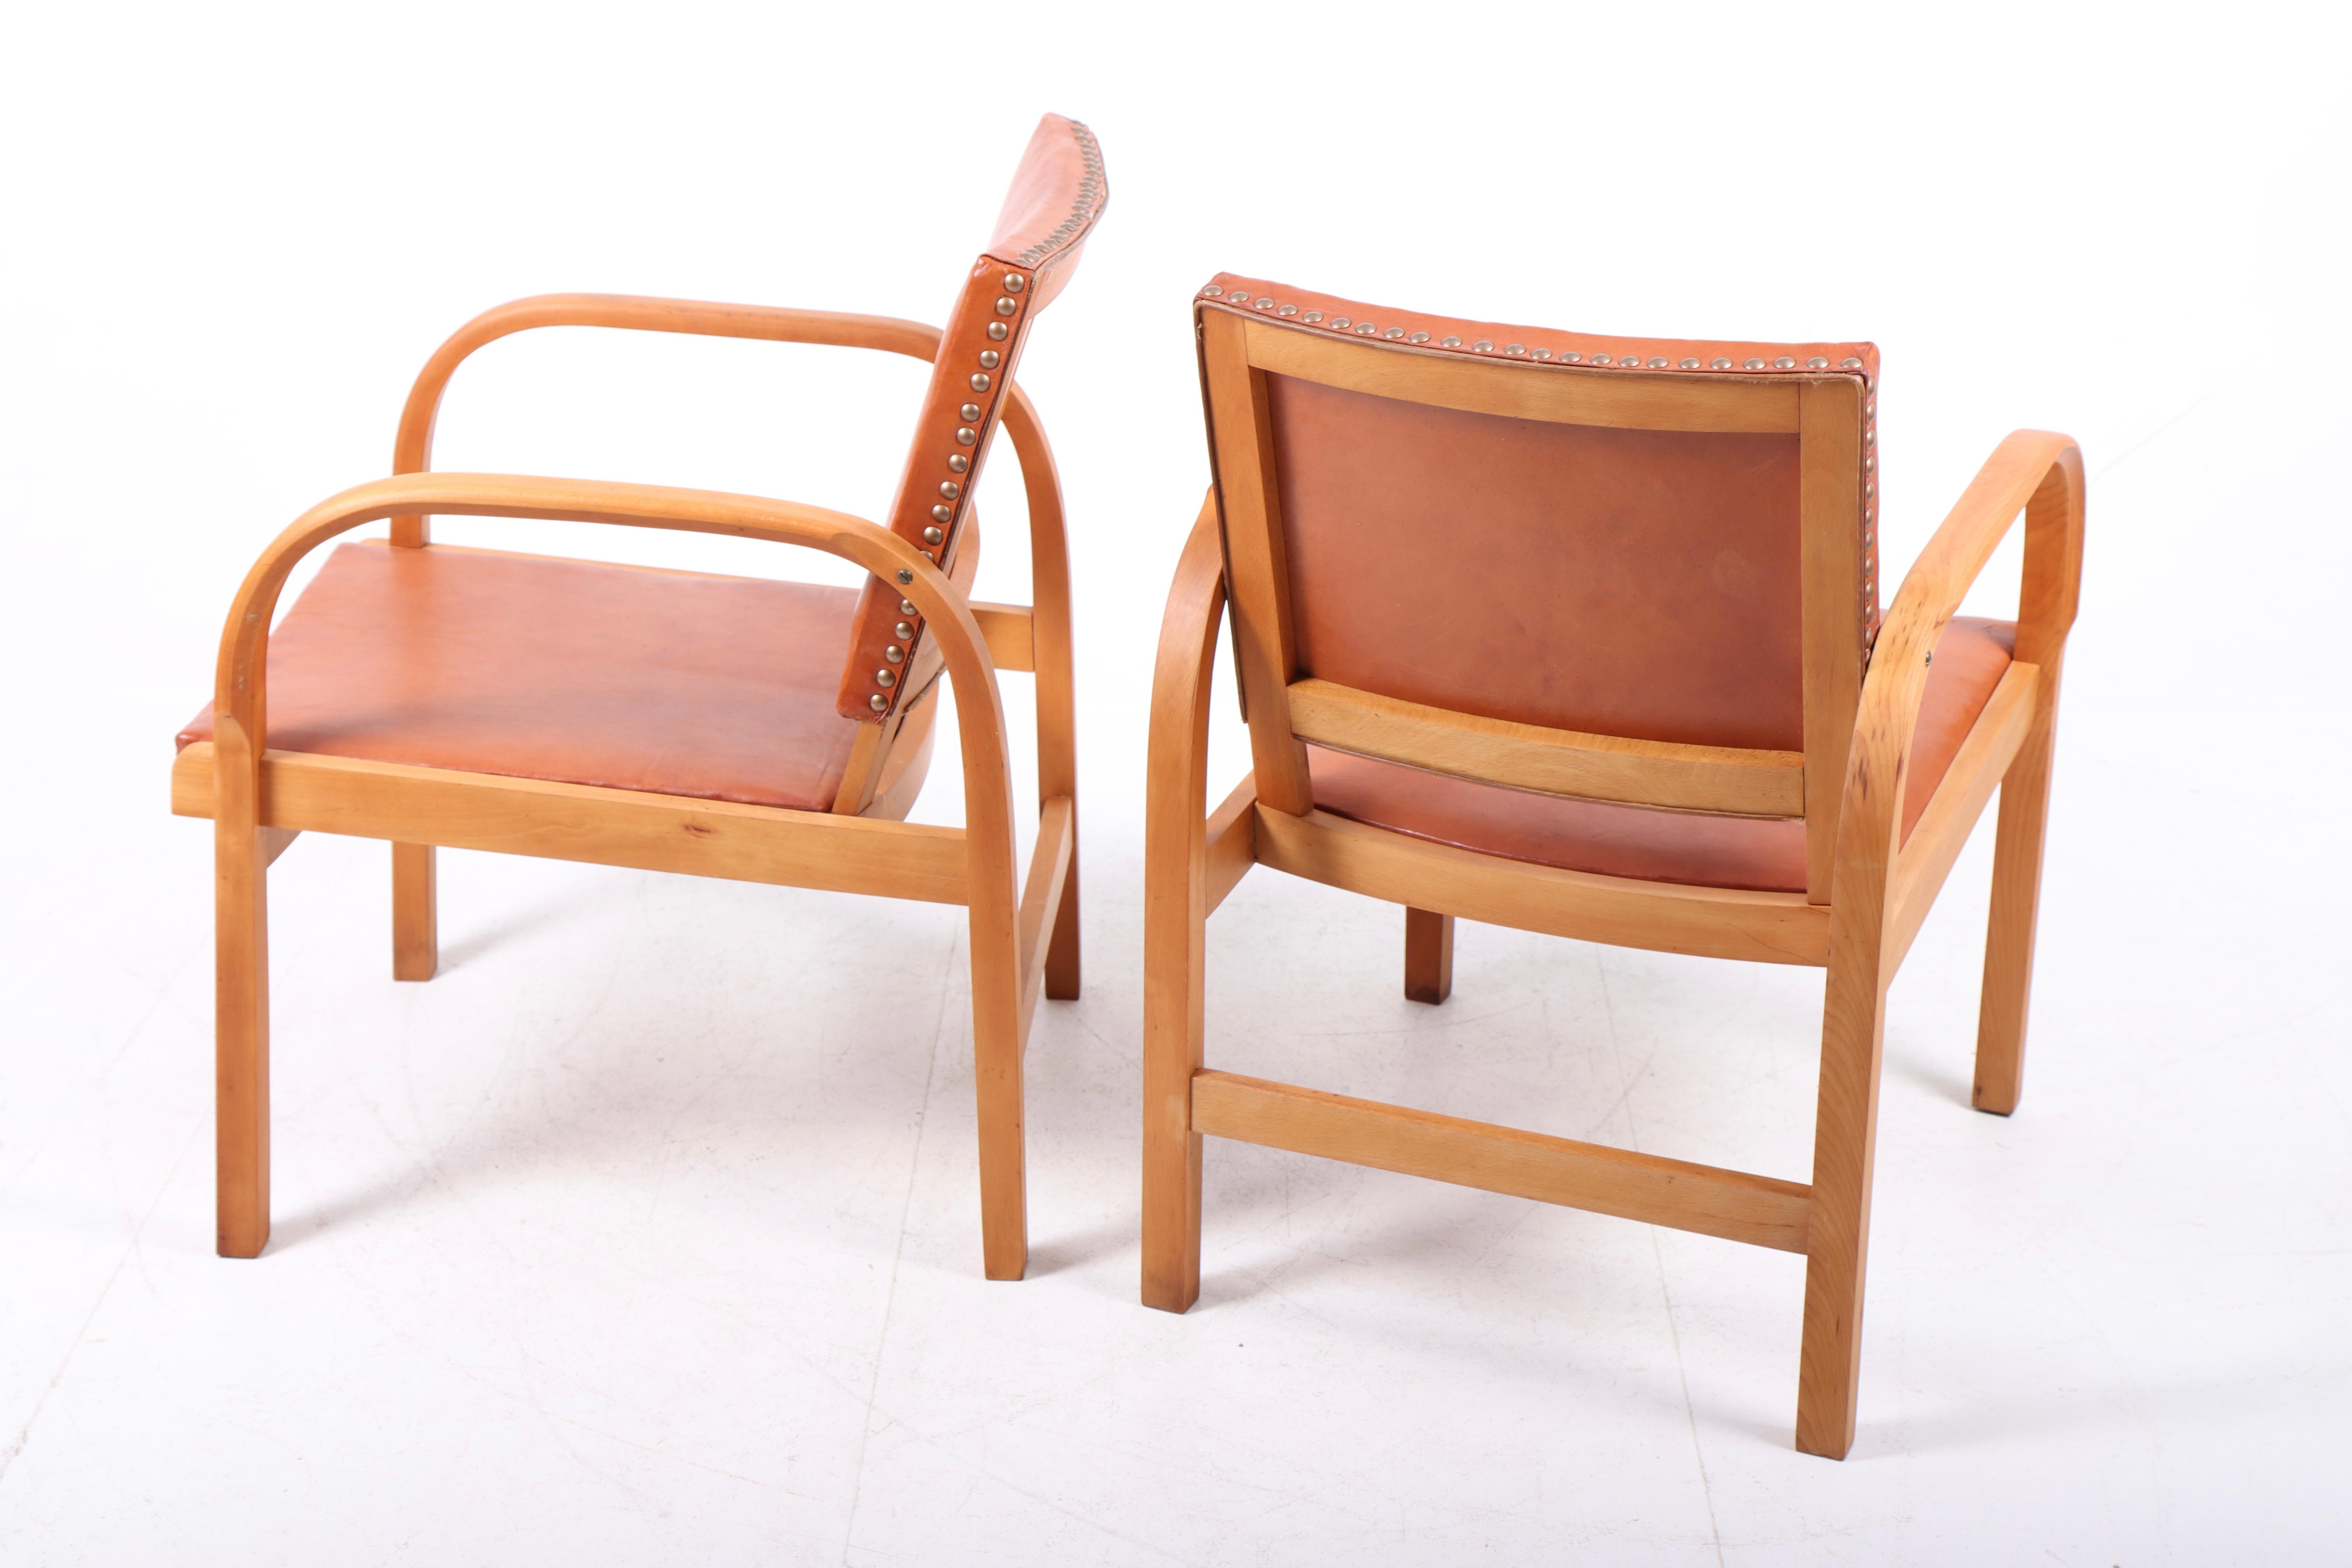 Leather Pair of Danish Lounge Chairs by Magnus L. Stephensen, 1940s For Sale